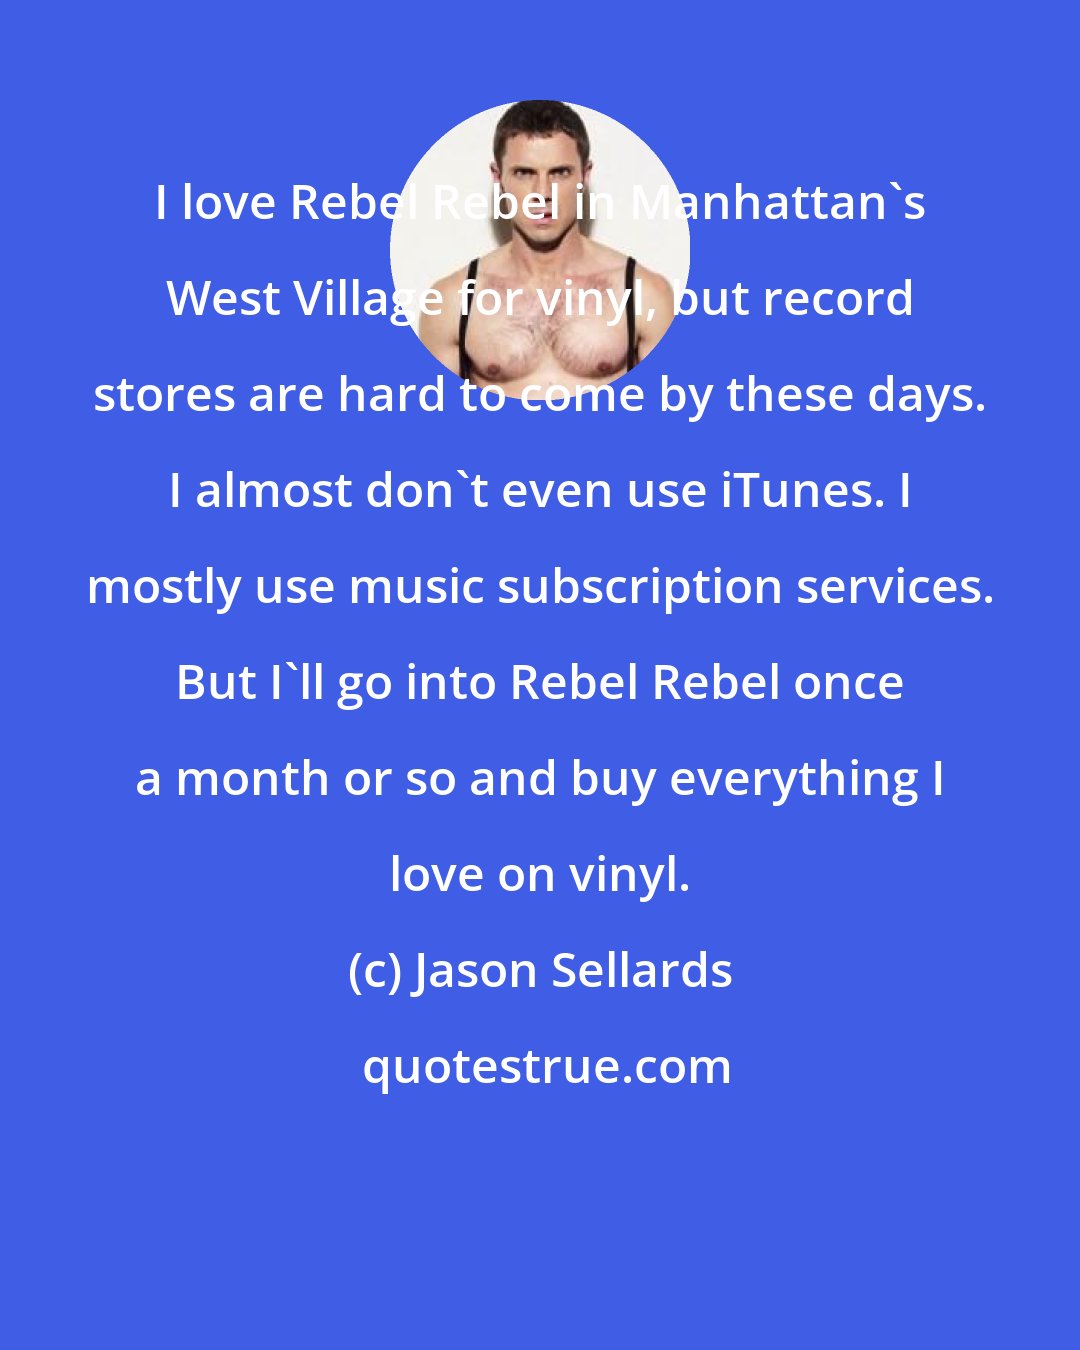 Jason Sellards: I love Rebel Rebel in Manhattan's West Village for vinyl, but record stores are hard to come by these days. I almost don't even use iTunes. I mostly use music subscription services. But I'll go into Rebel Rebel once a month or so and buy everything I love on vinyl.